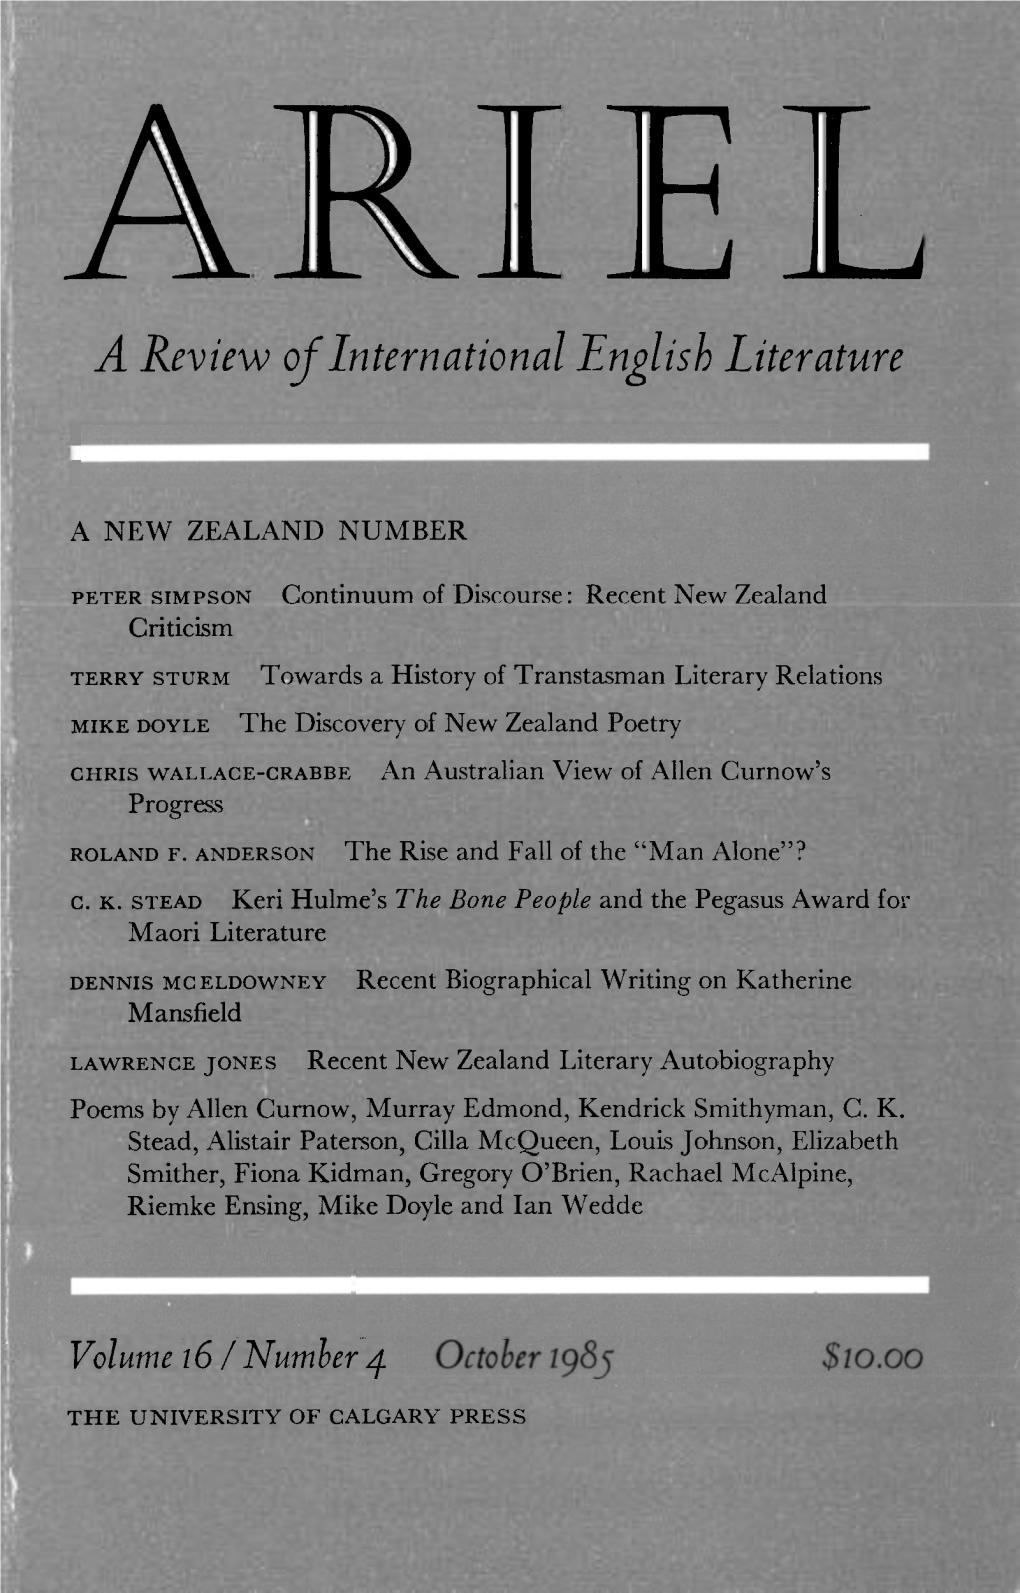 A Review of International English Literature